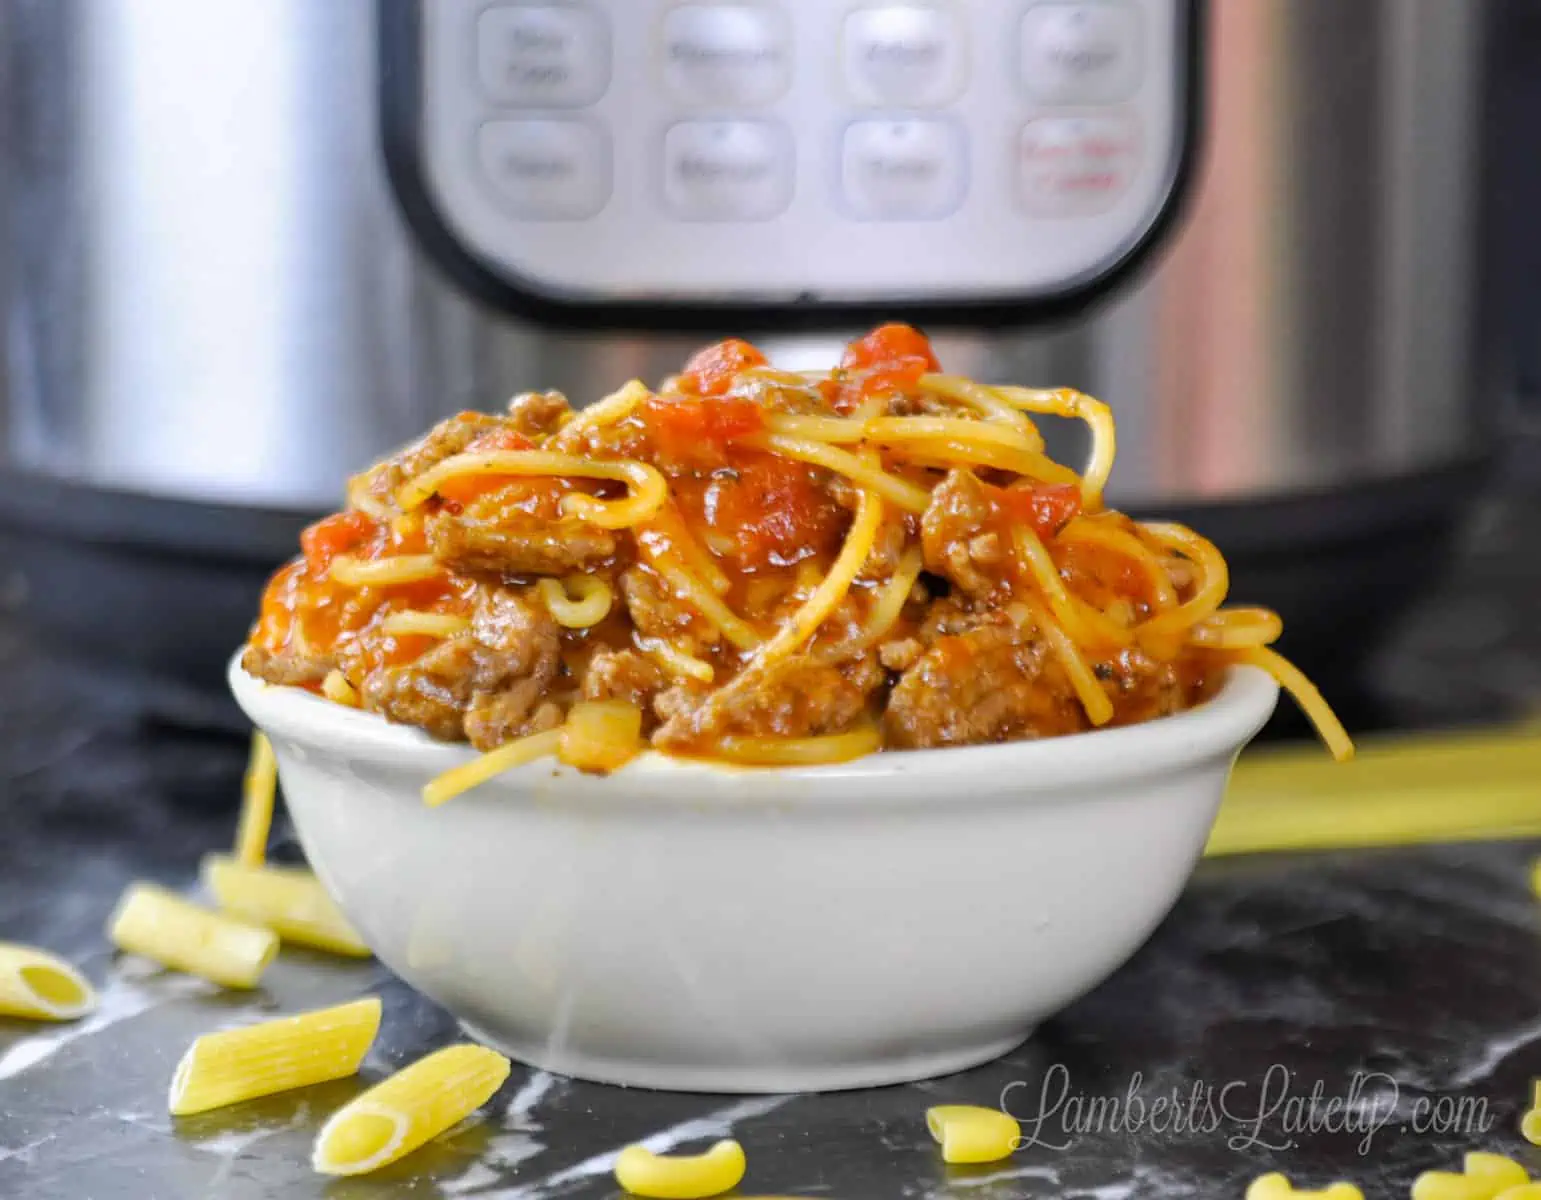 spaghetti in a bowl in front of an instant pot.